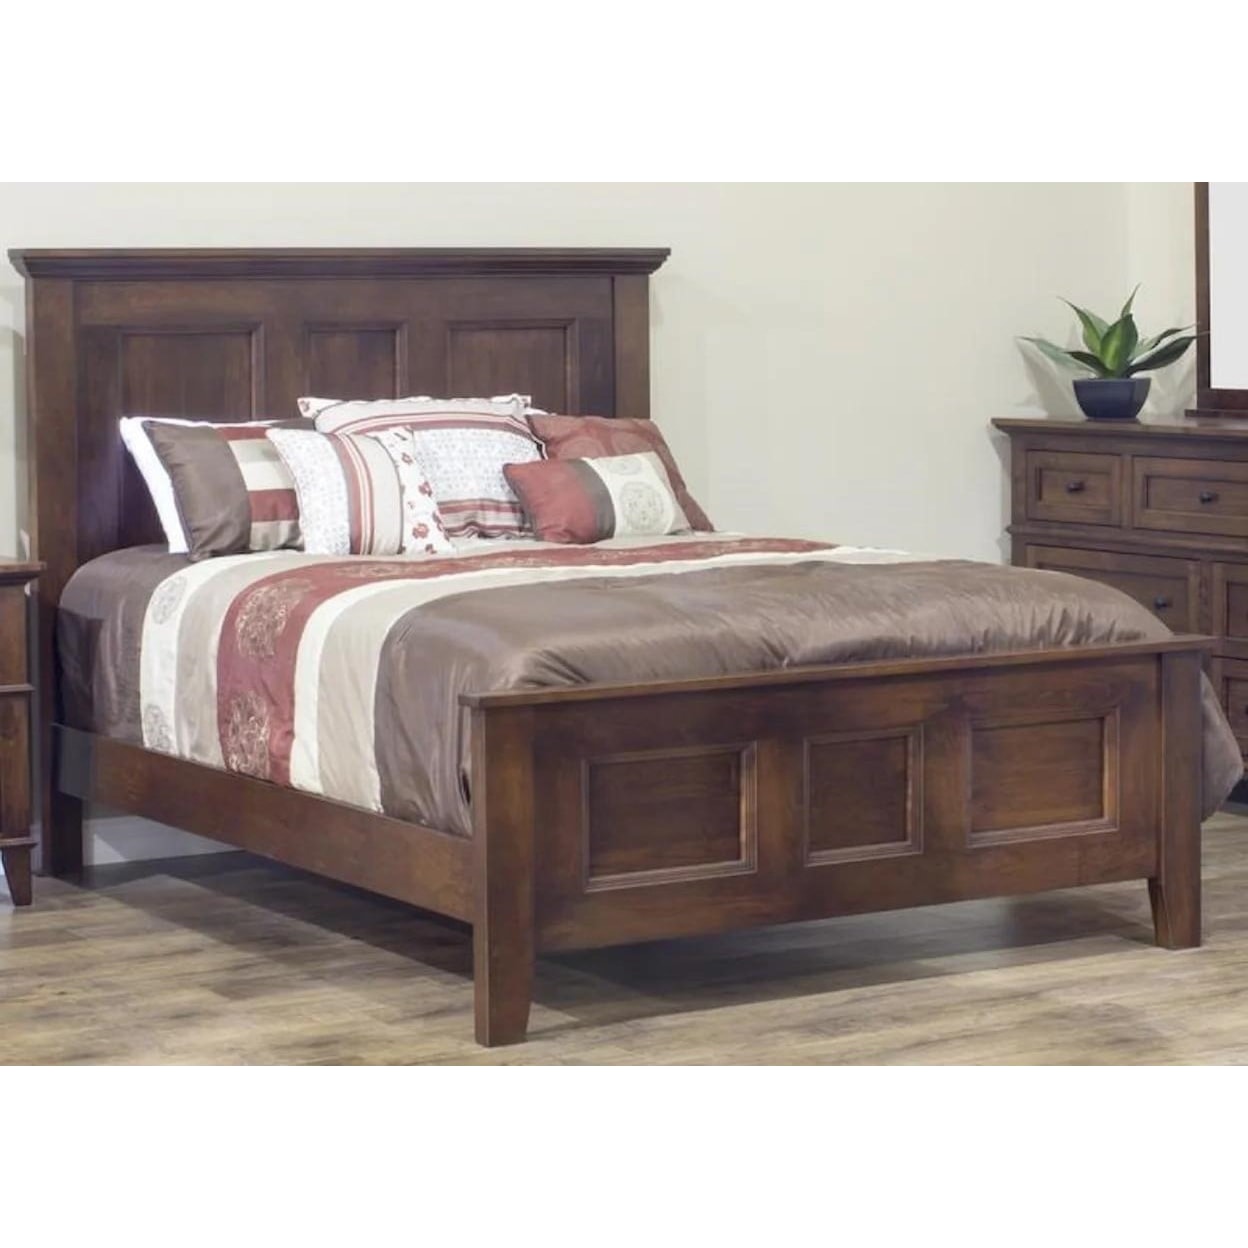 L.J. Gascho Furniture Brentwood Brentwood Queen Bed